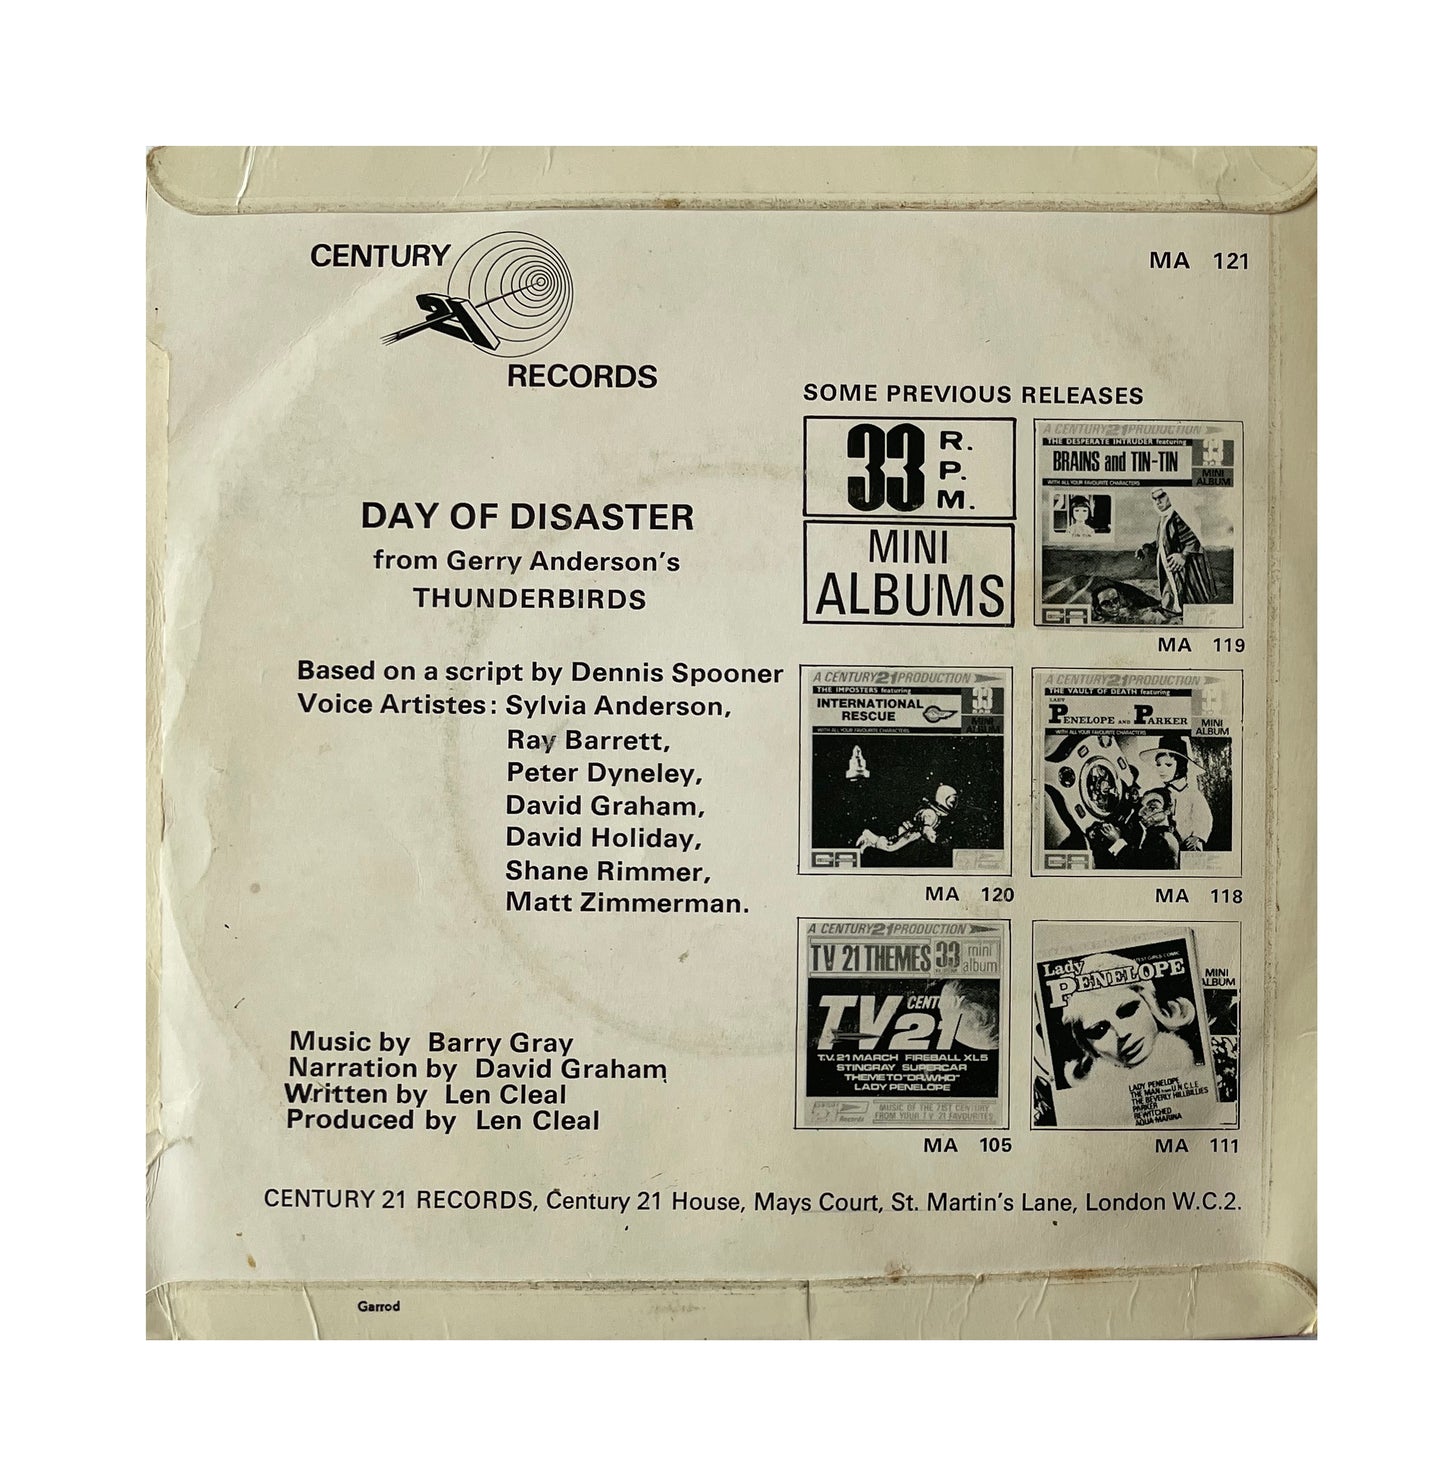 Vintage Gerry Andersons Century 21 Records Production - Day Of Disaster Featuring Thunderbirds - 33RPM Mini Album - 21 Minutes Of Adventure Vinyl Record Vintage 1967 No. MA 121